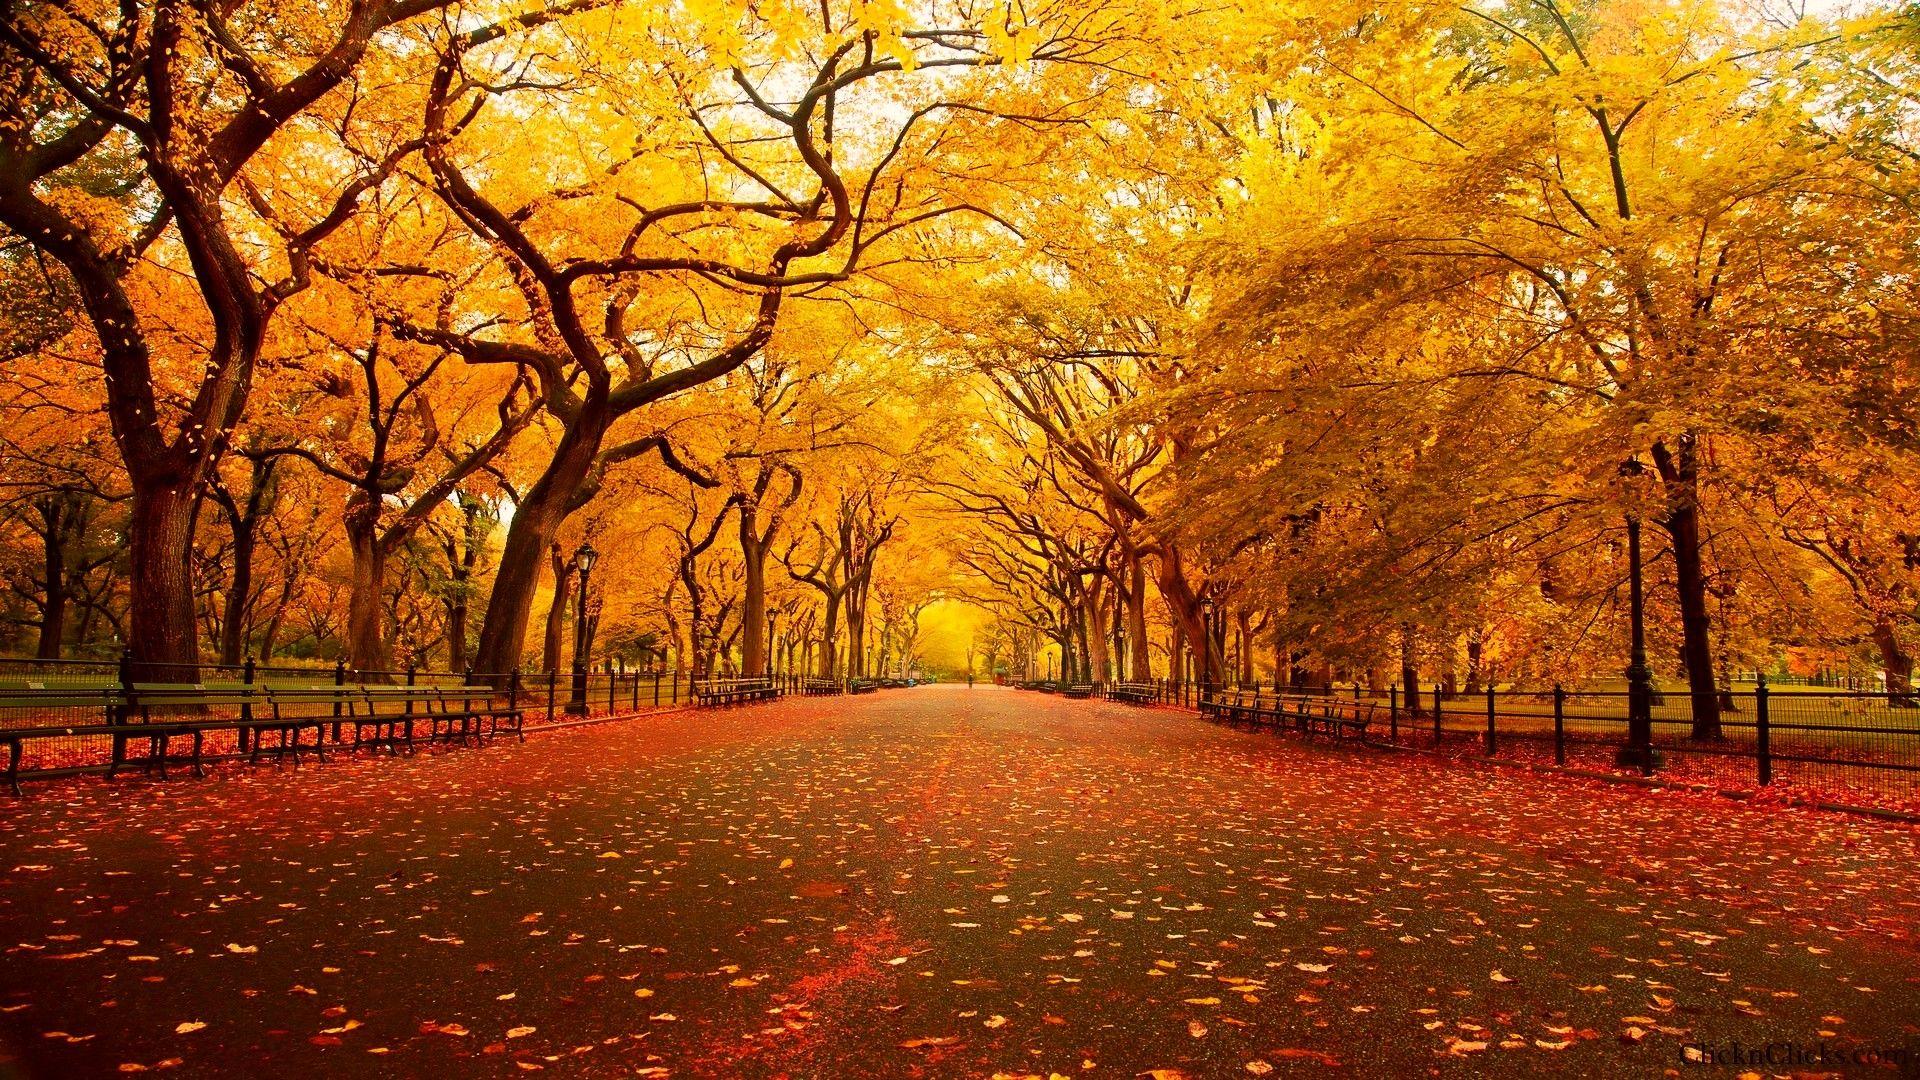 New York Fall Wallpapers - Top Free New York Fall Backgrounds ...